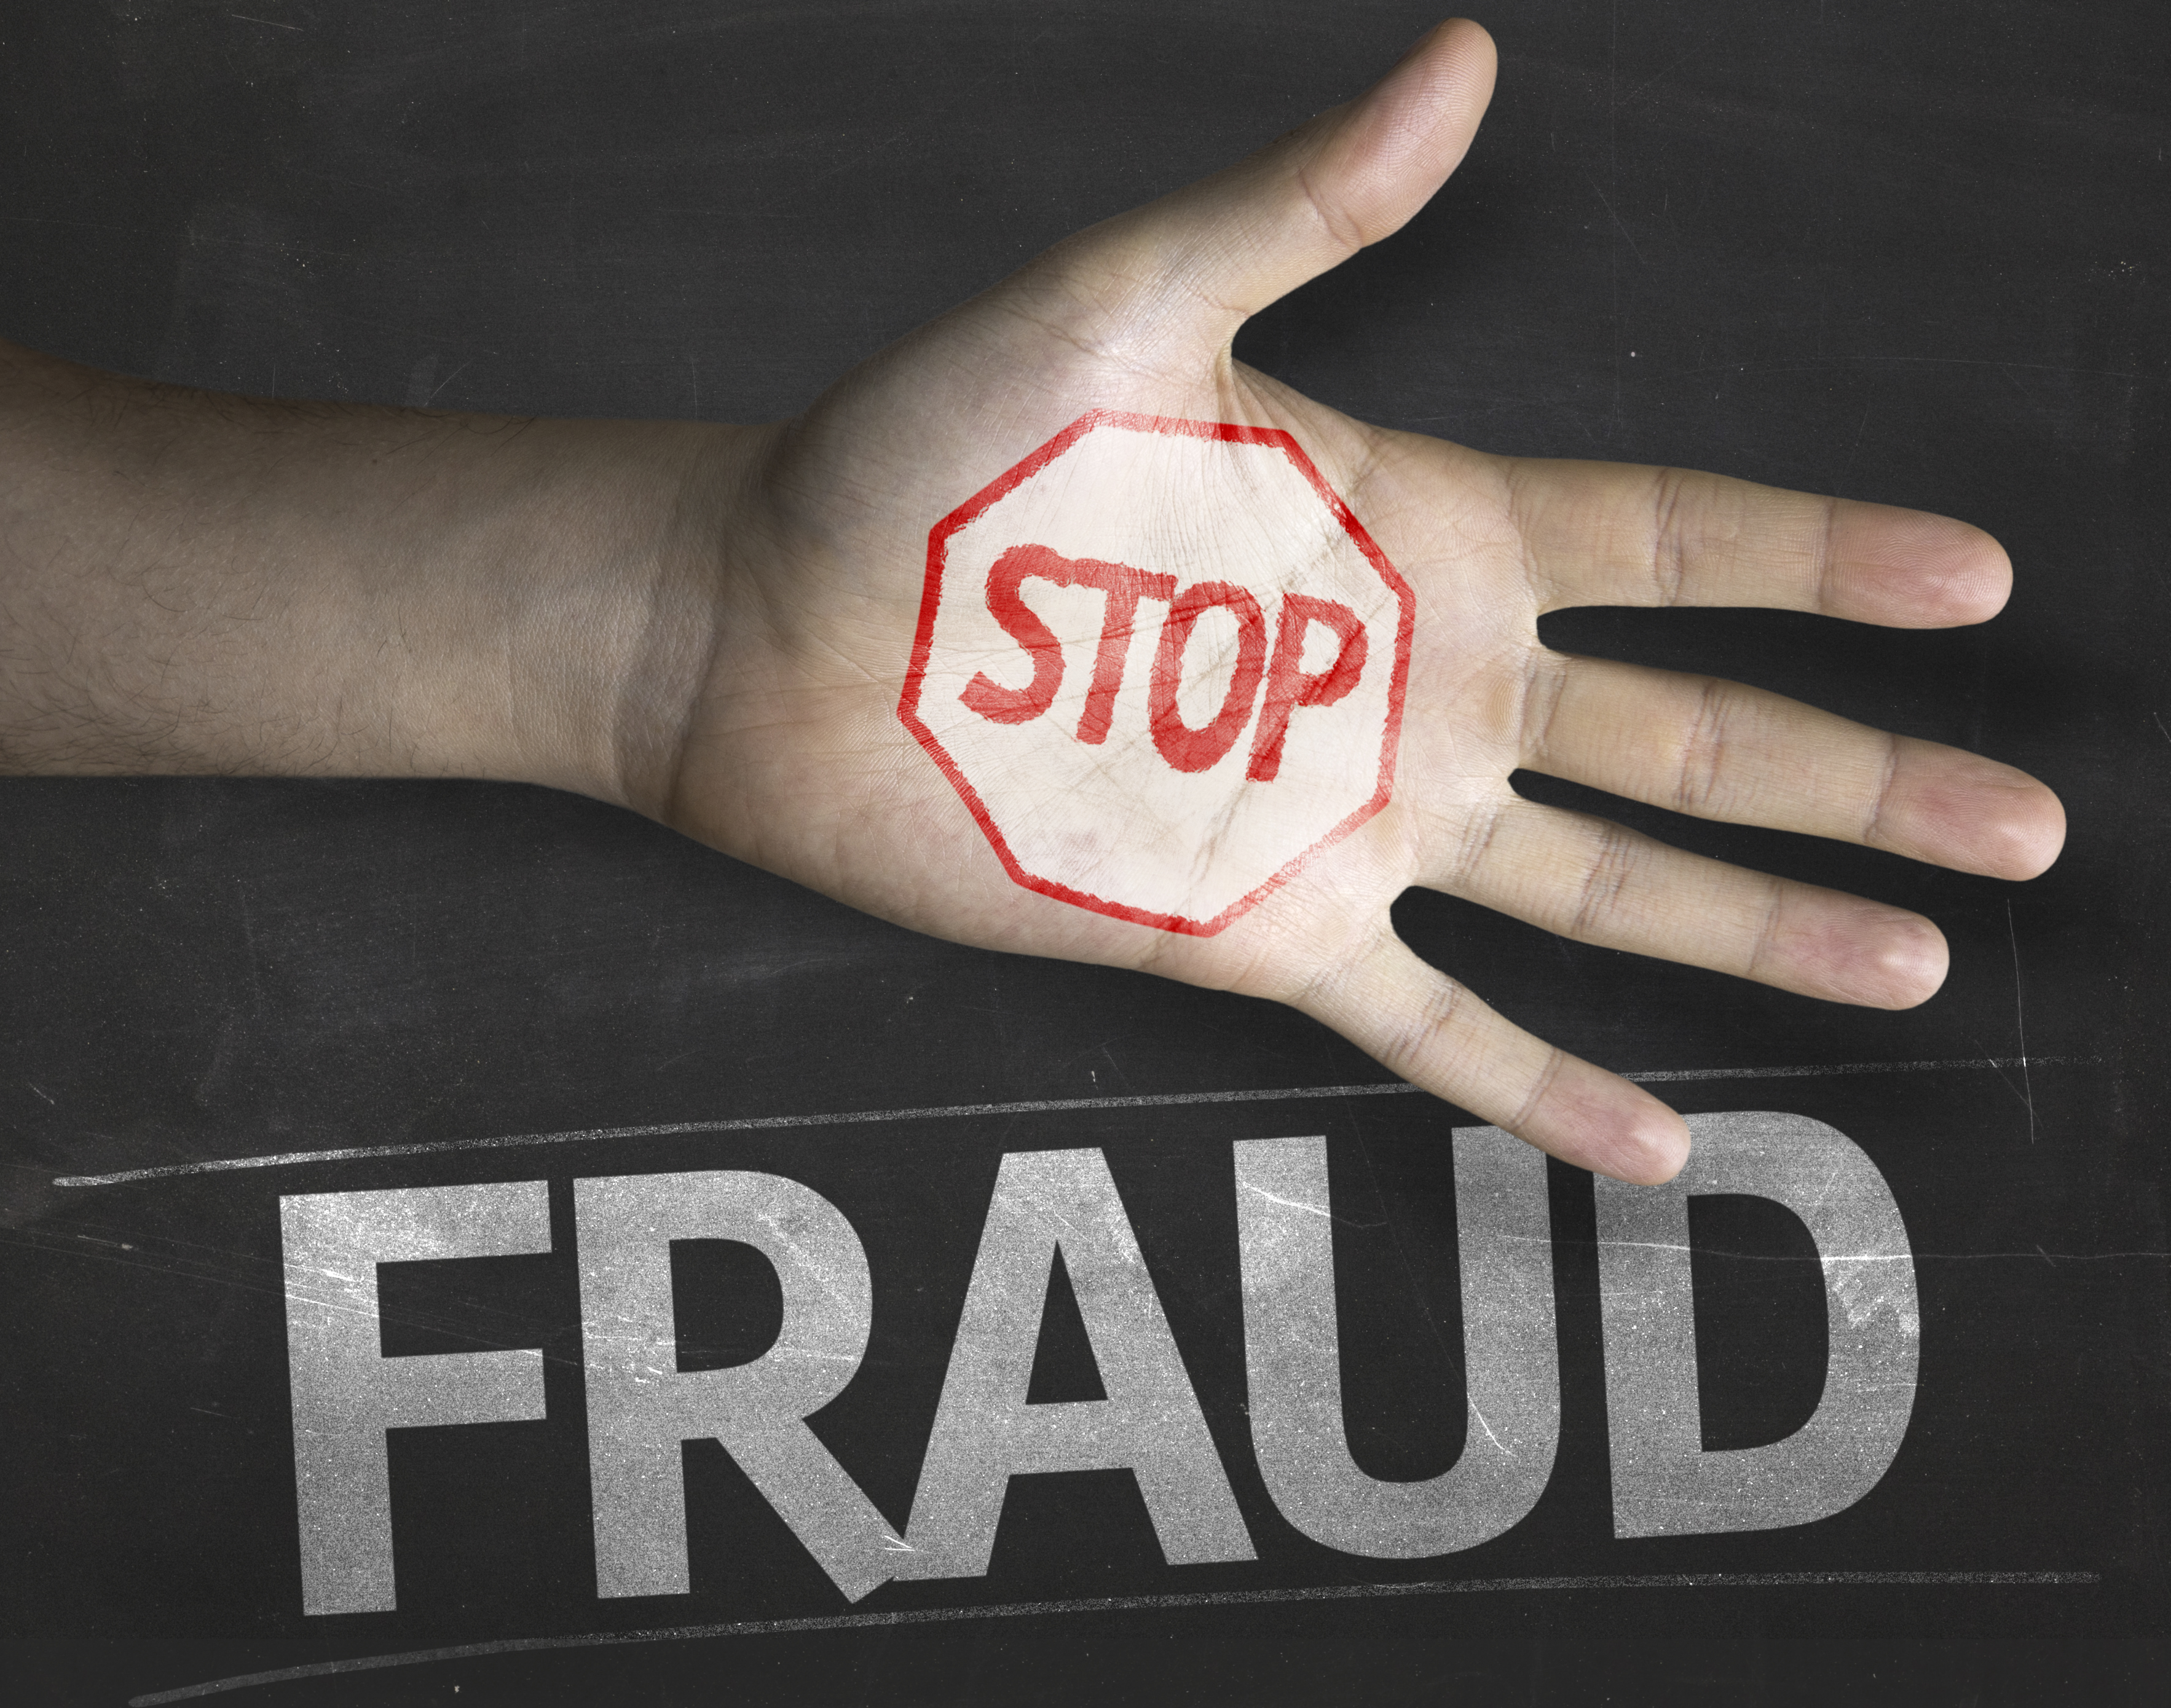 Educational and Creative composition with the message Stop Fraud